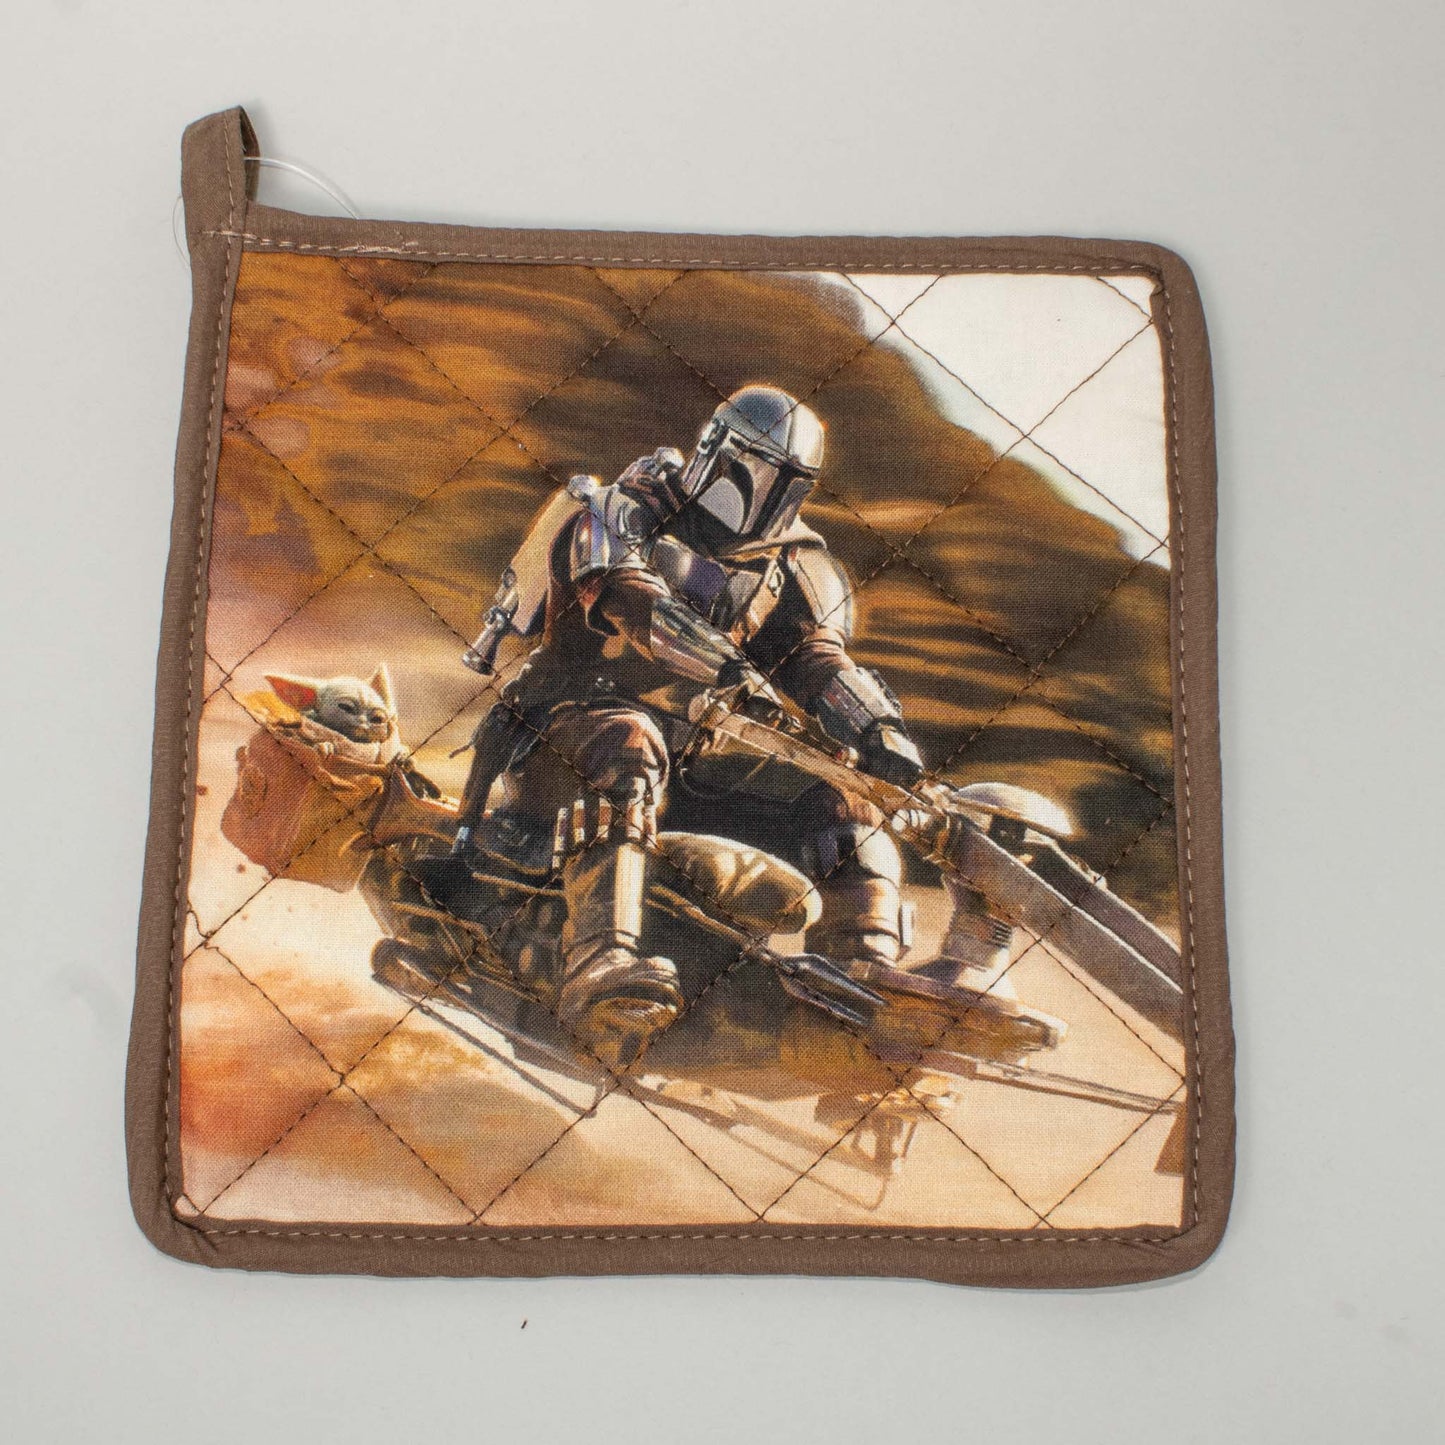 Load image into Gallery viewer, Din Djarin and Grogu on Speeder Bike (Star Wars: The Mandalorian) Quilted Pot Holder
